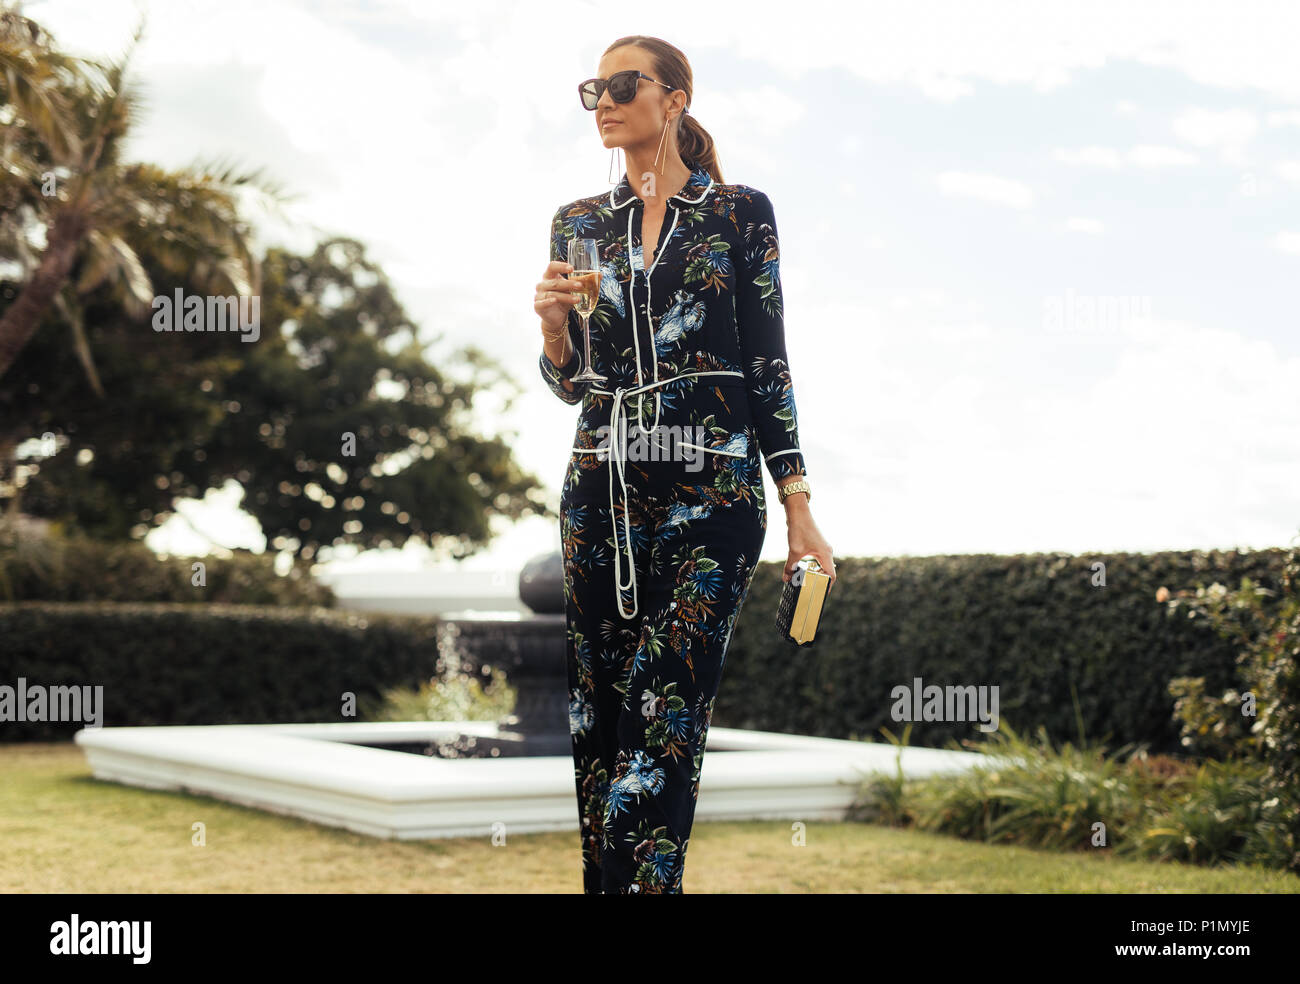 Gorgeous woman walking in lawn with glass of wine. Stylish wealthy female with wine walking outdoors. Stock Photo